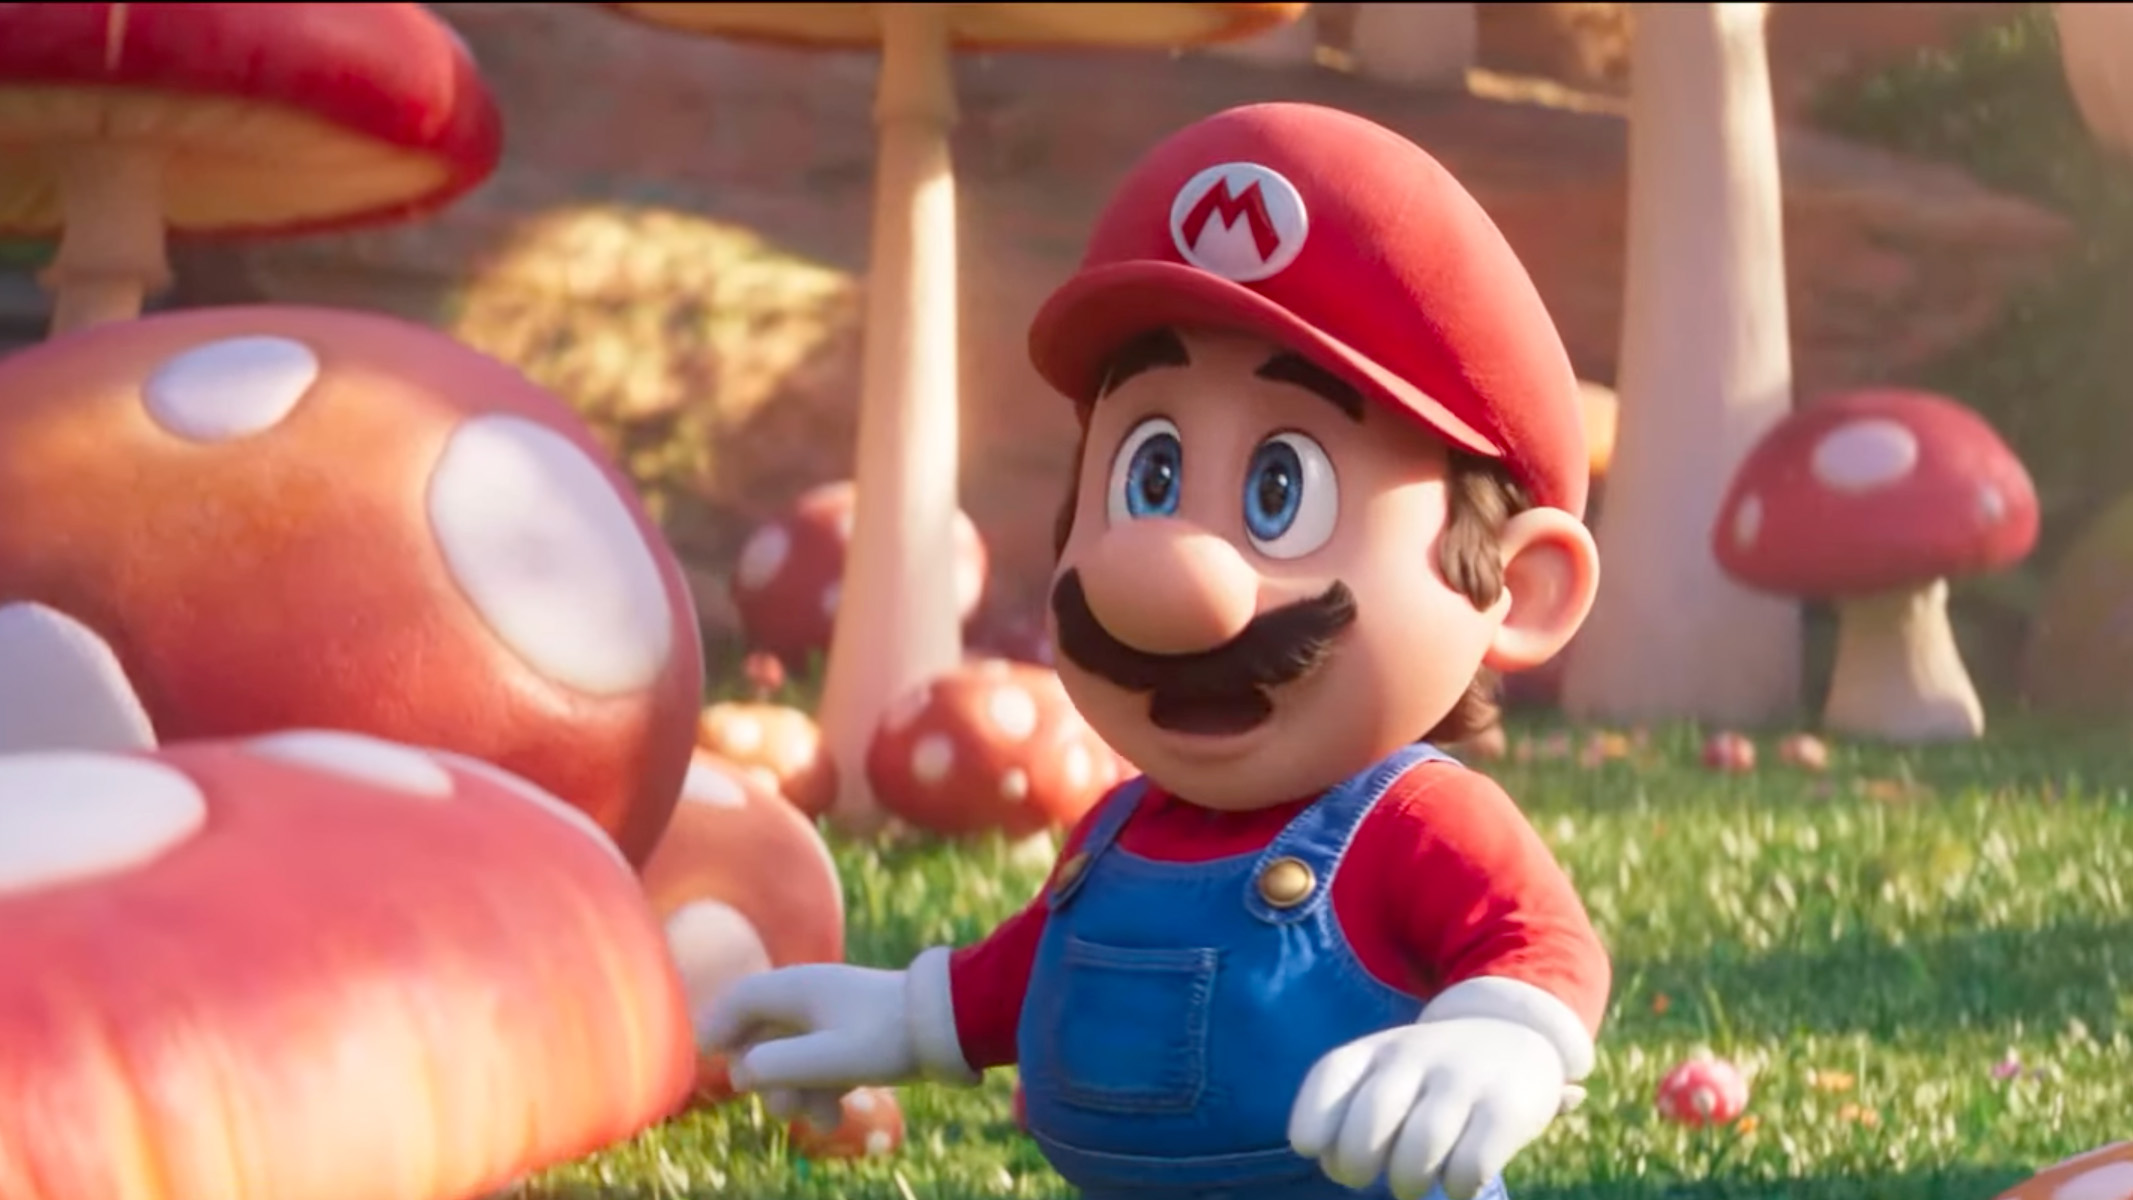 Can The Super Mario Bros Movie end 30 years of terrible video game